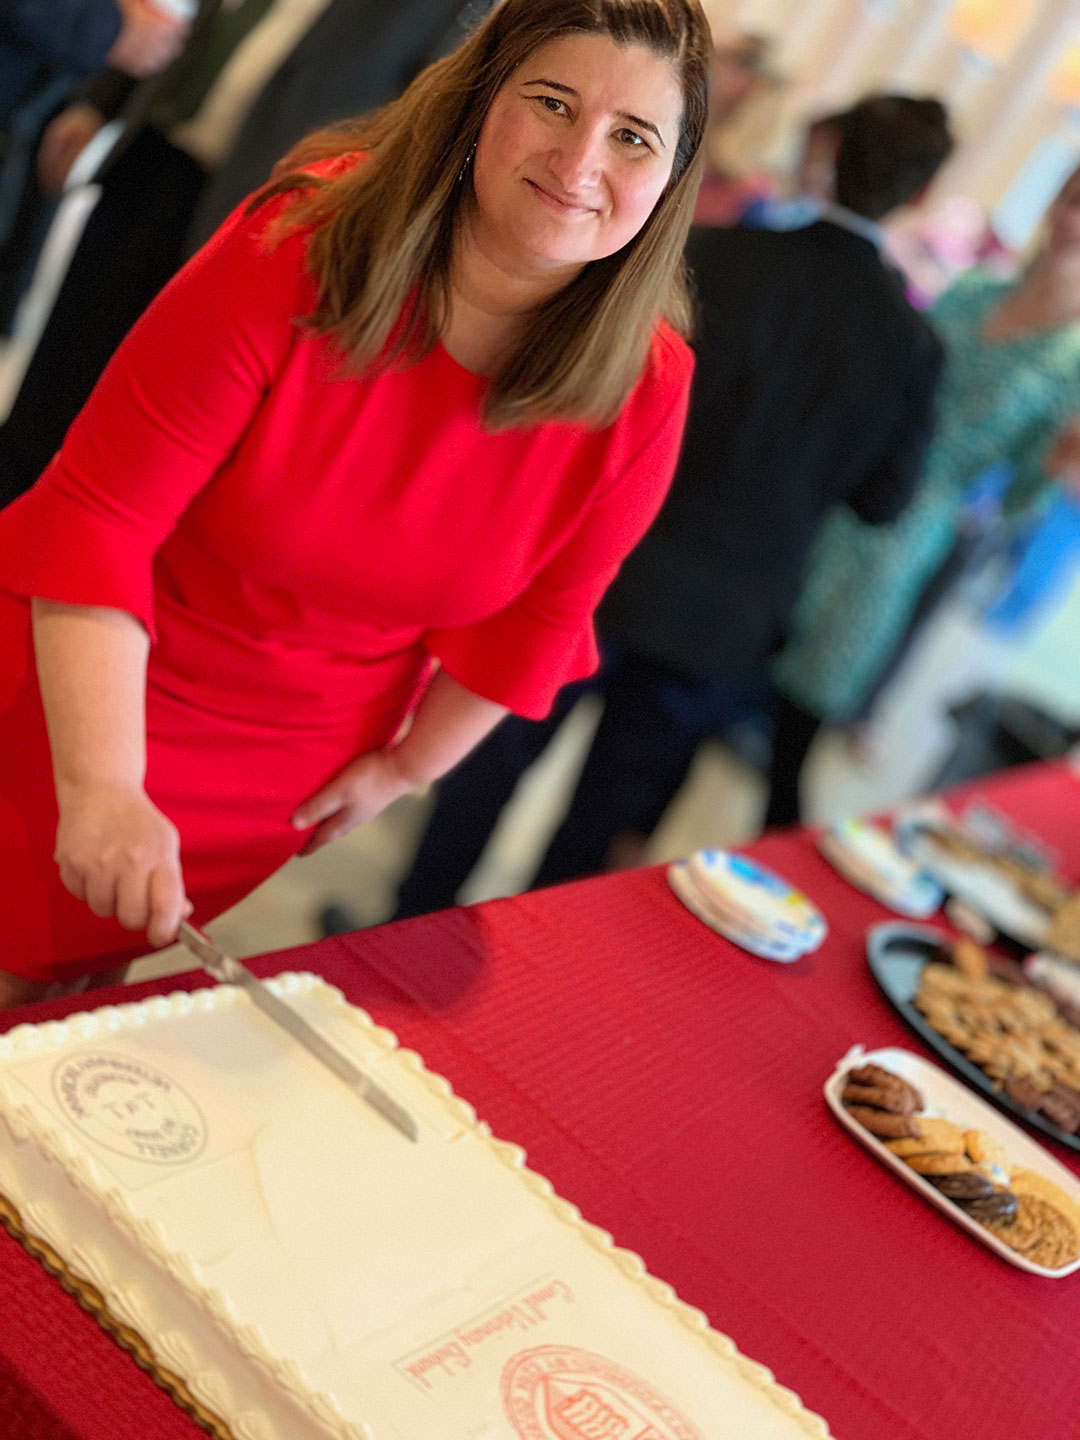 Dr. Marta Castelhano cuts the "accredited" cake at the event.